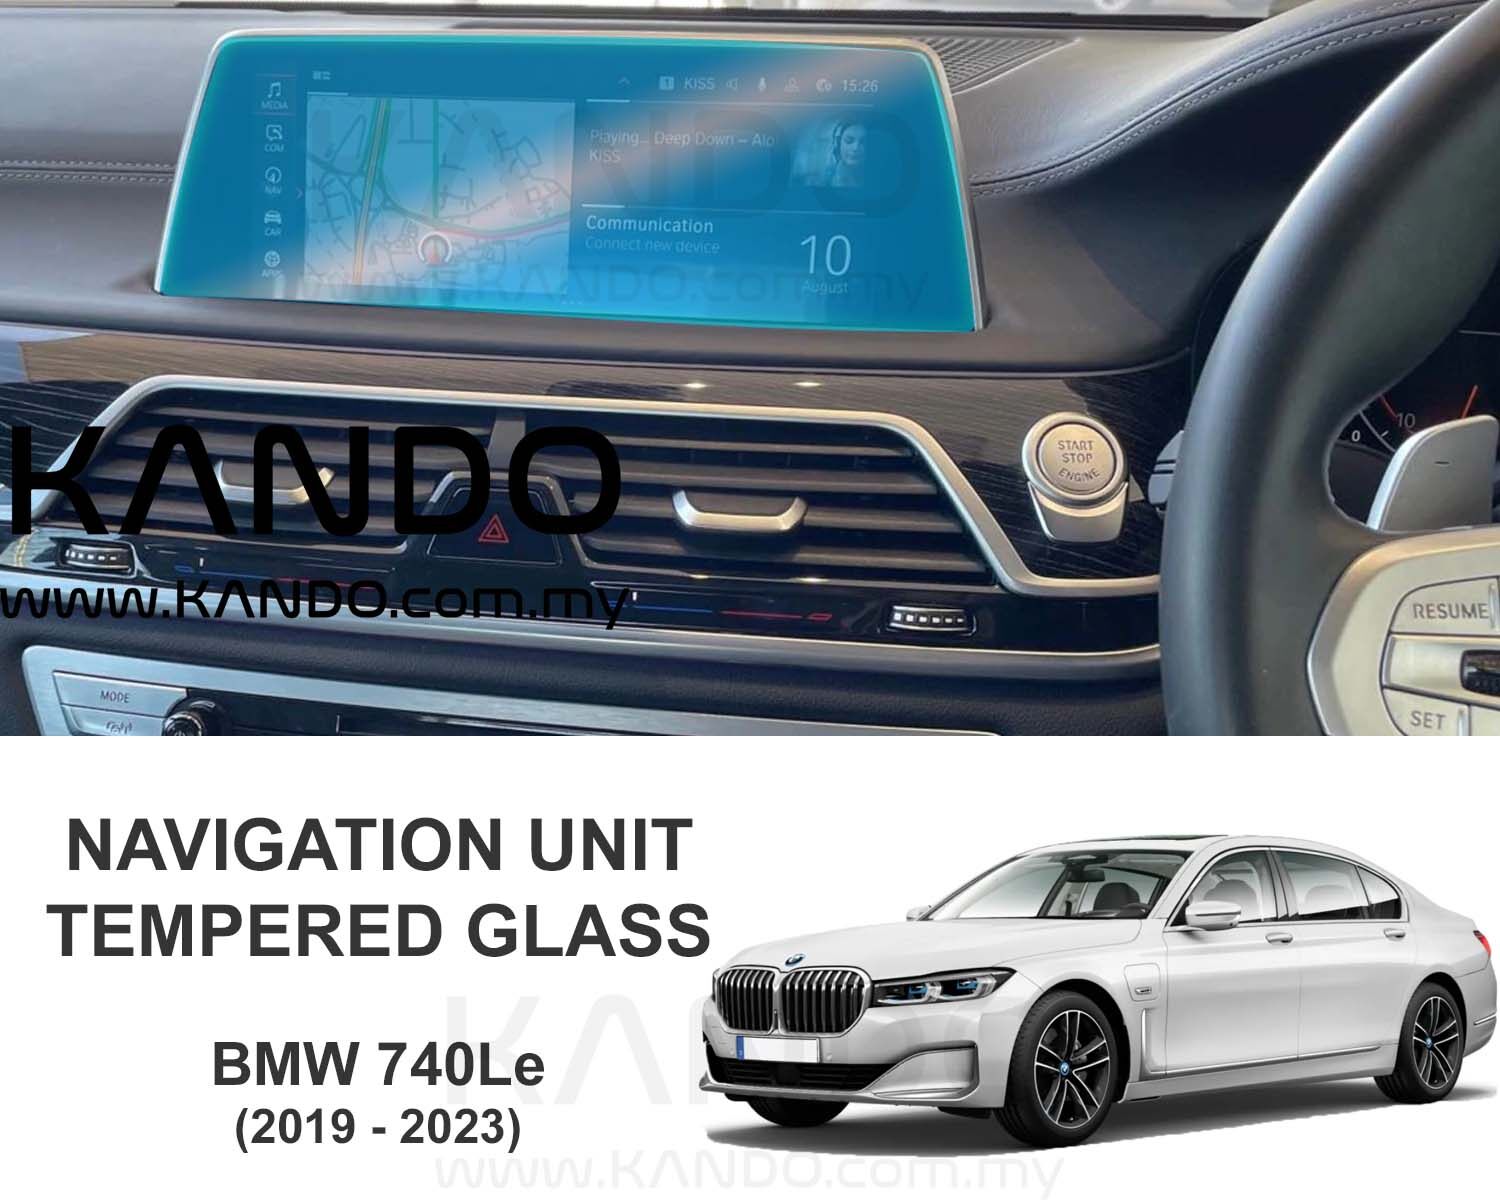 BMW 7 Series Tempered Glass Protector BMW 7 Series Meter Tempered Glass Protector BMW 7 Series Instrument Cluster Tempered Glass BMW 740Le Screen Protector Glass BMW 740 Tempered Glass Protector